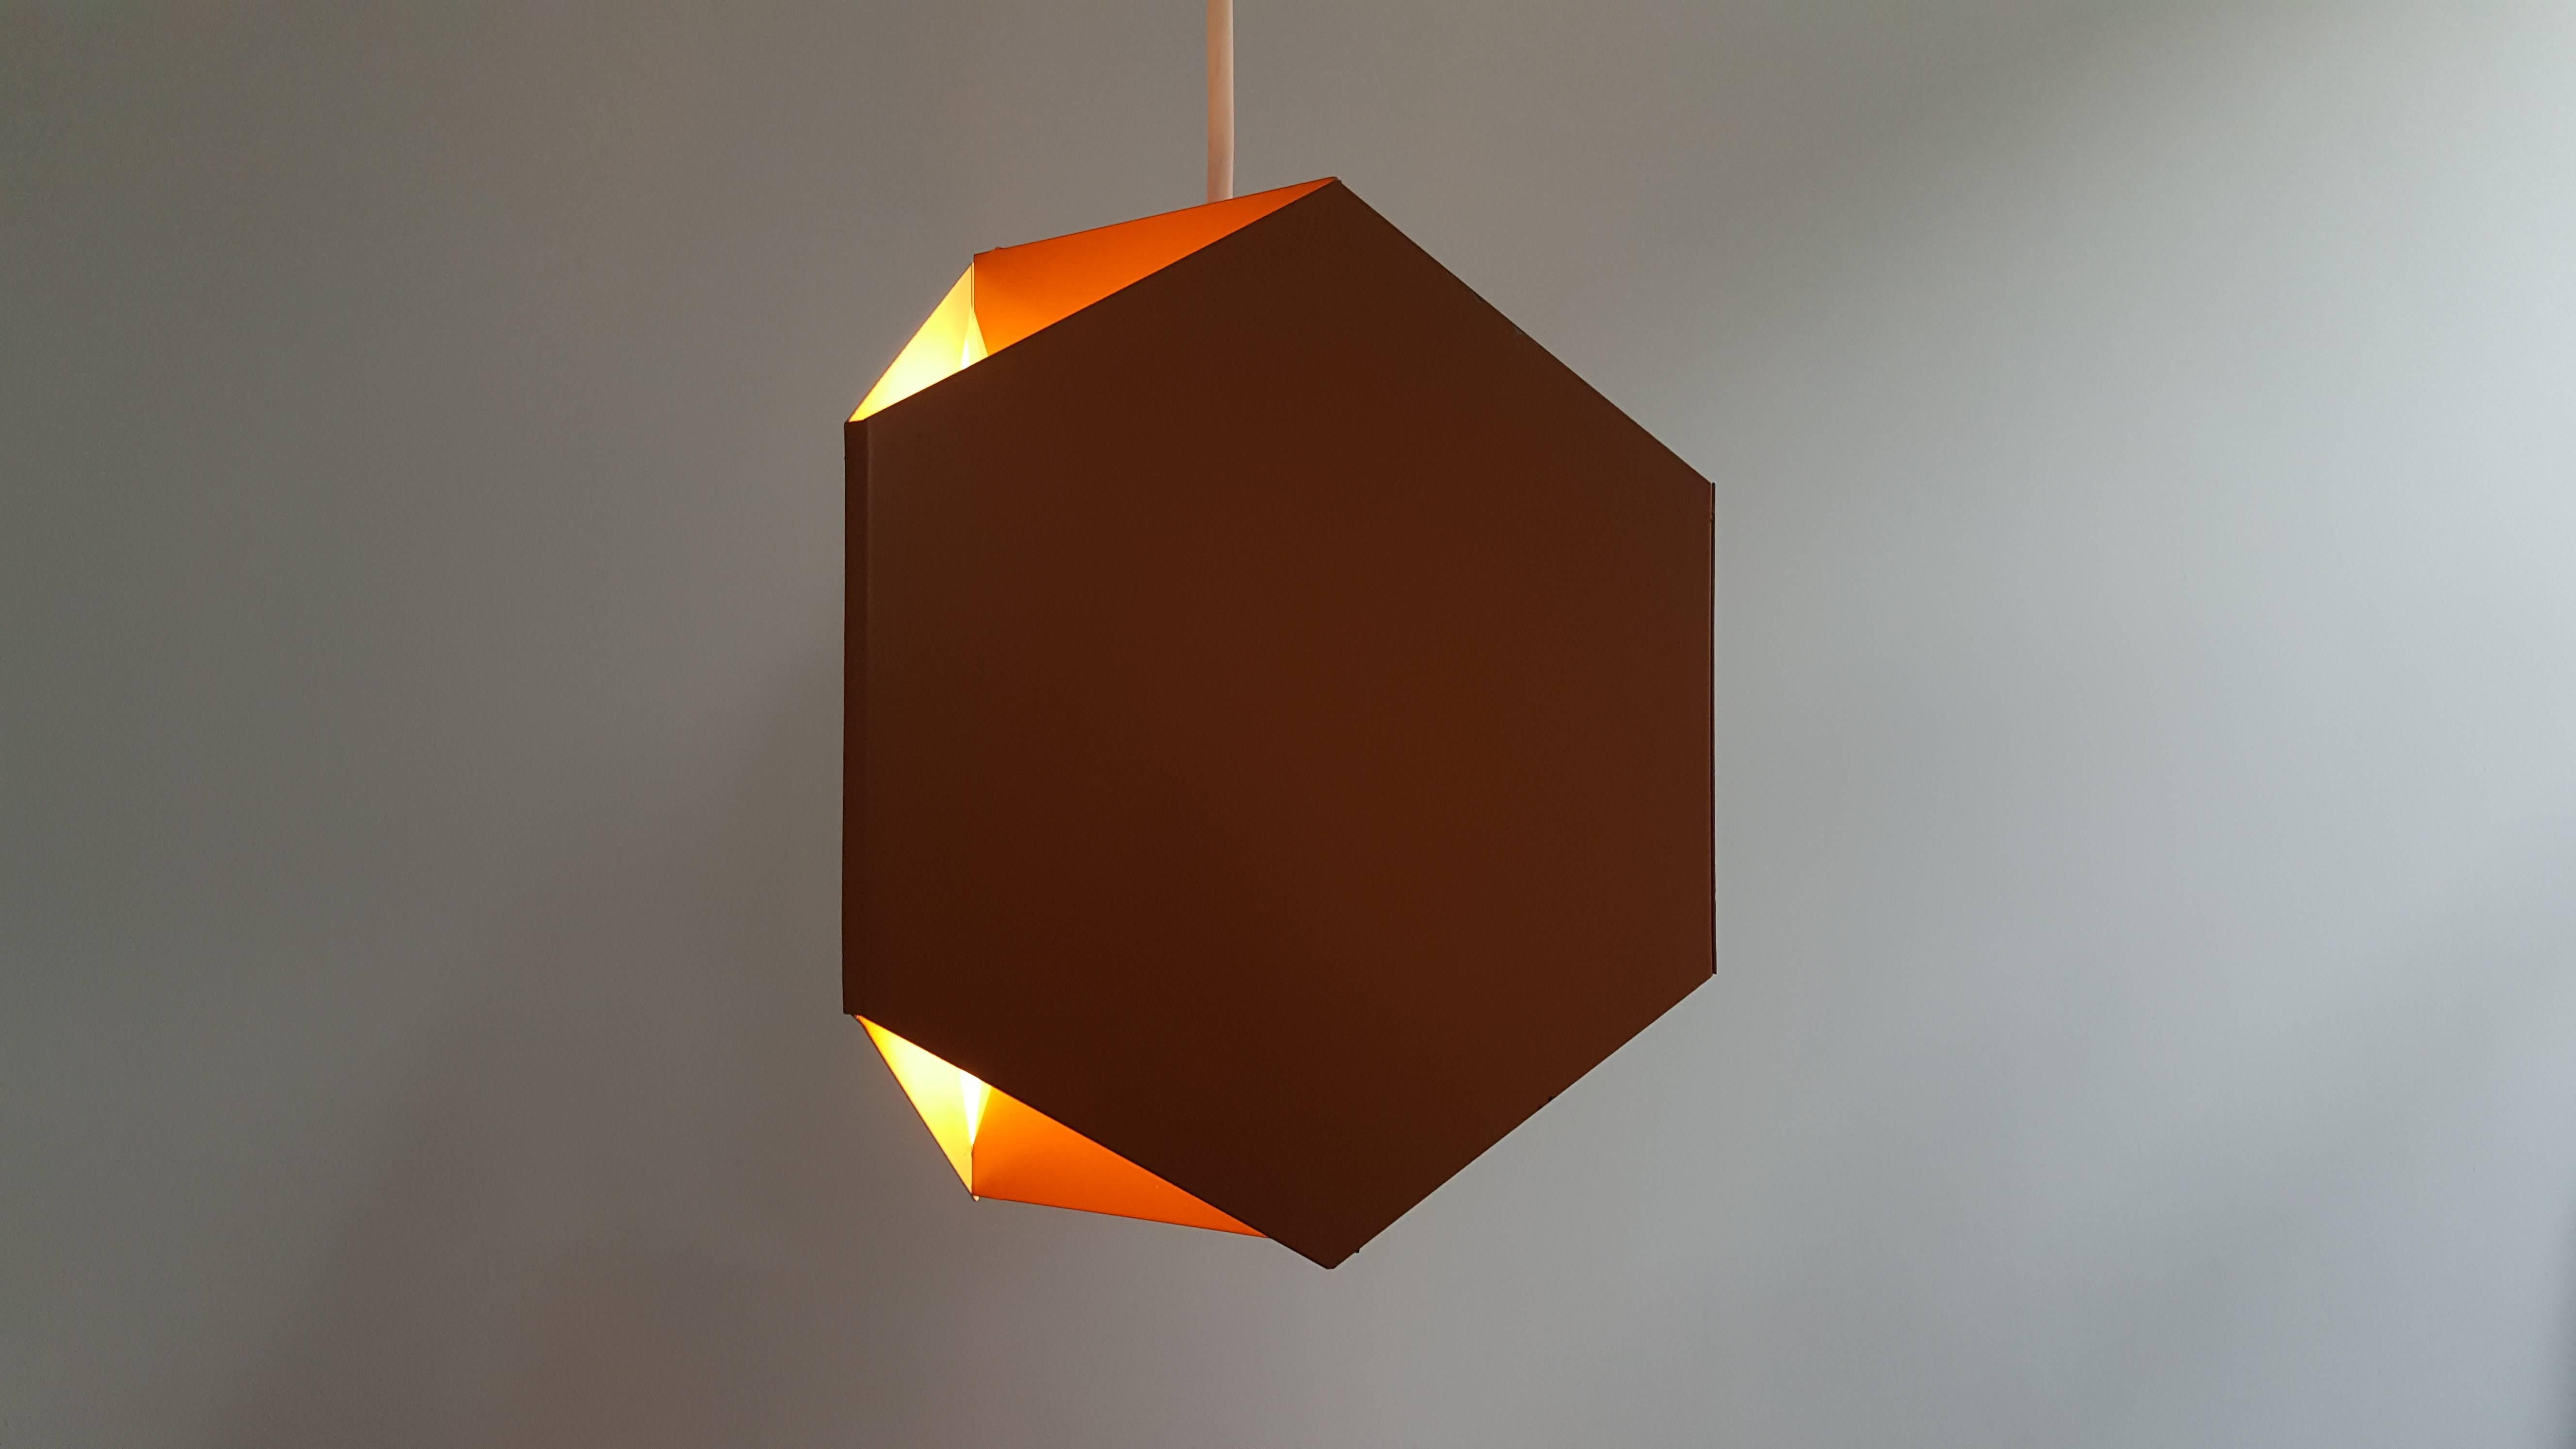 Ole Panton Seks-tre pendant light for Lyfa, 1960s.

The ‘Seks-tre’ powder coated pendant lamps were designed by Ole Panton for Lyfa in 1960s.

The lamp consists of triangles and Hexagons which correlates to the 'Seks-tre'meaning six-three,